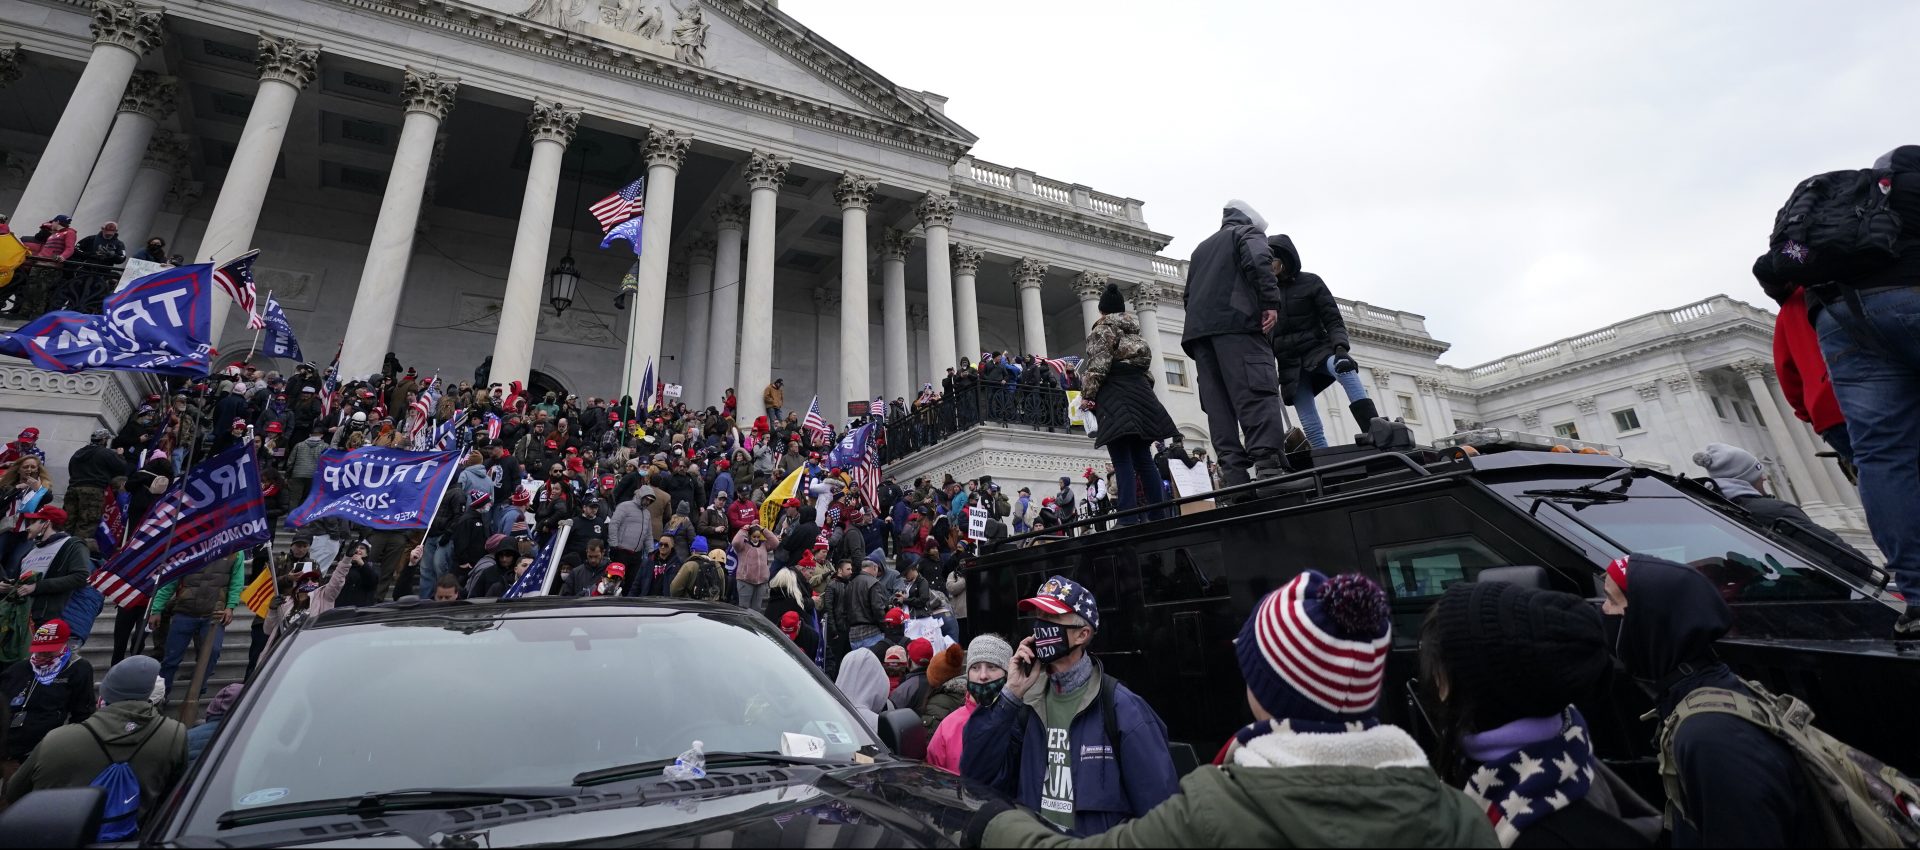 Trump supporters stand on top of a police vehicle, Wednesday, Jan. 6, 2021, at the Capitol in Washington. As Congress prepares to affirm President-elect Joe Biden's victory, thousands of people have gathered to show their support for President Donald Trump and his claims of election fraud.